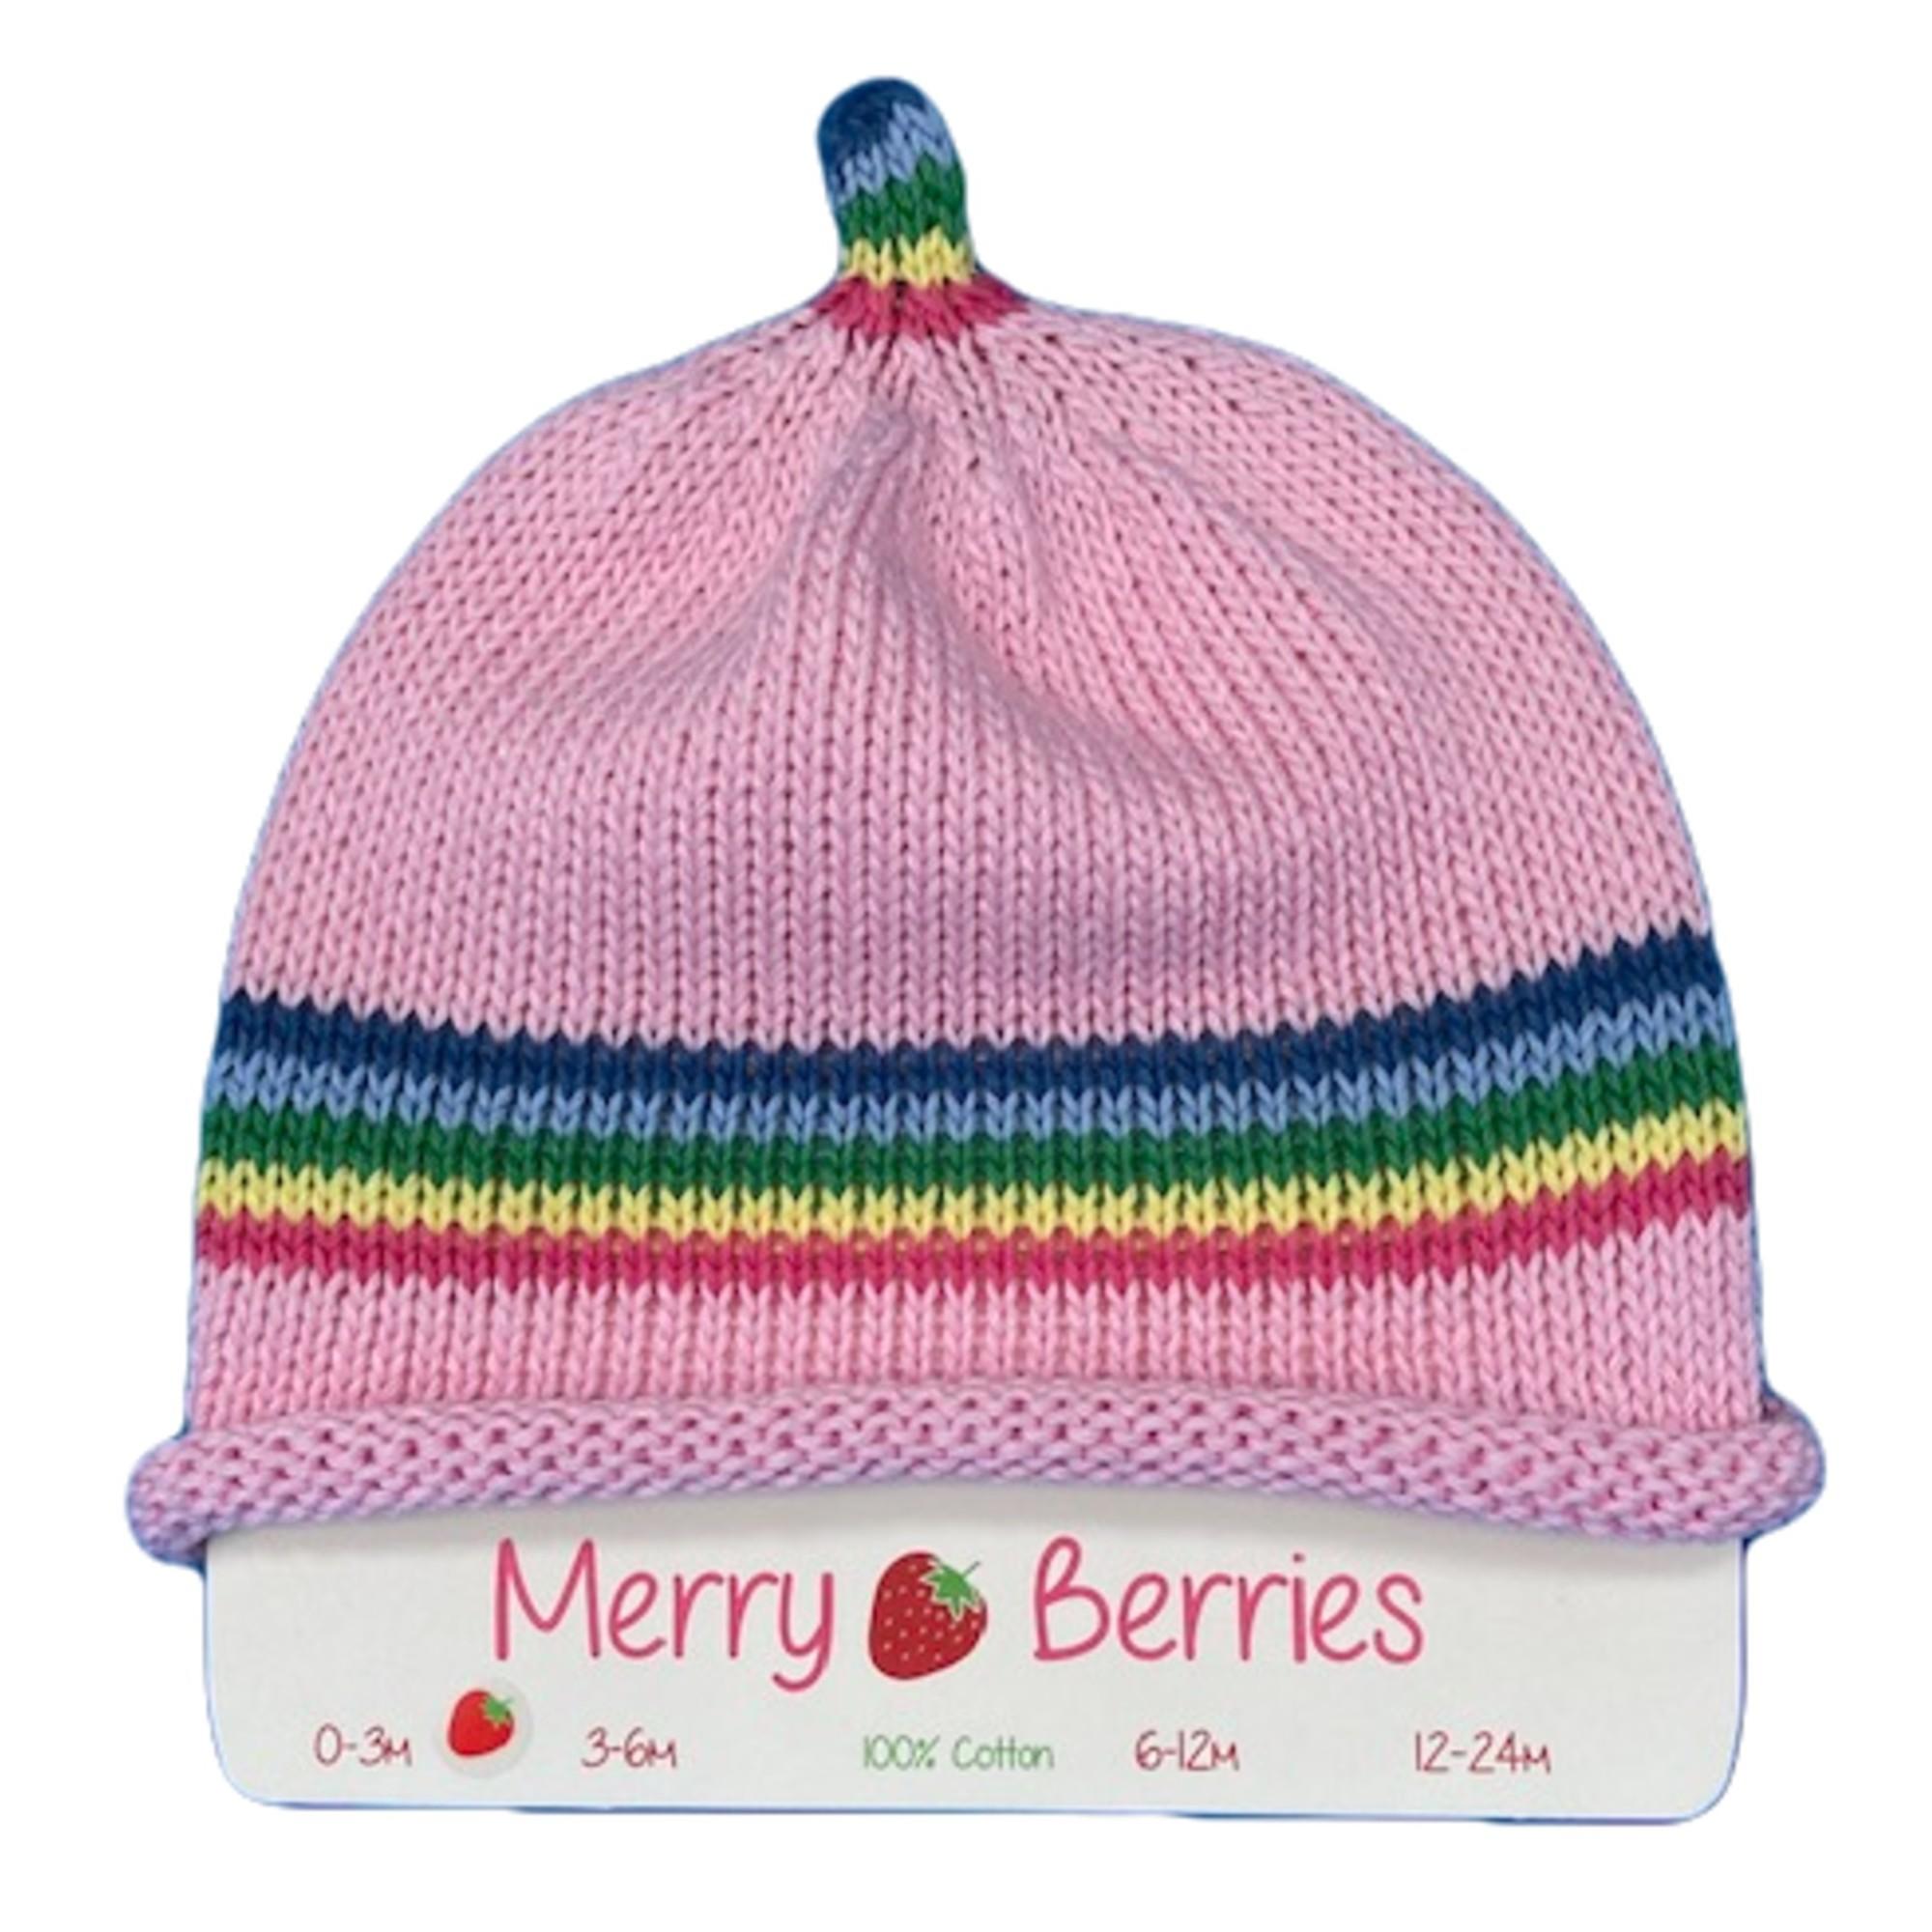 Merry Berries- Pink rainbow Knitted Baby Hat- 0-24 Months- Cotton